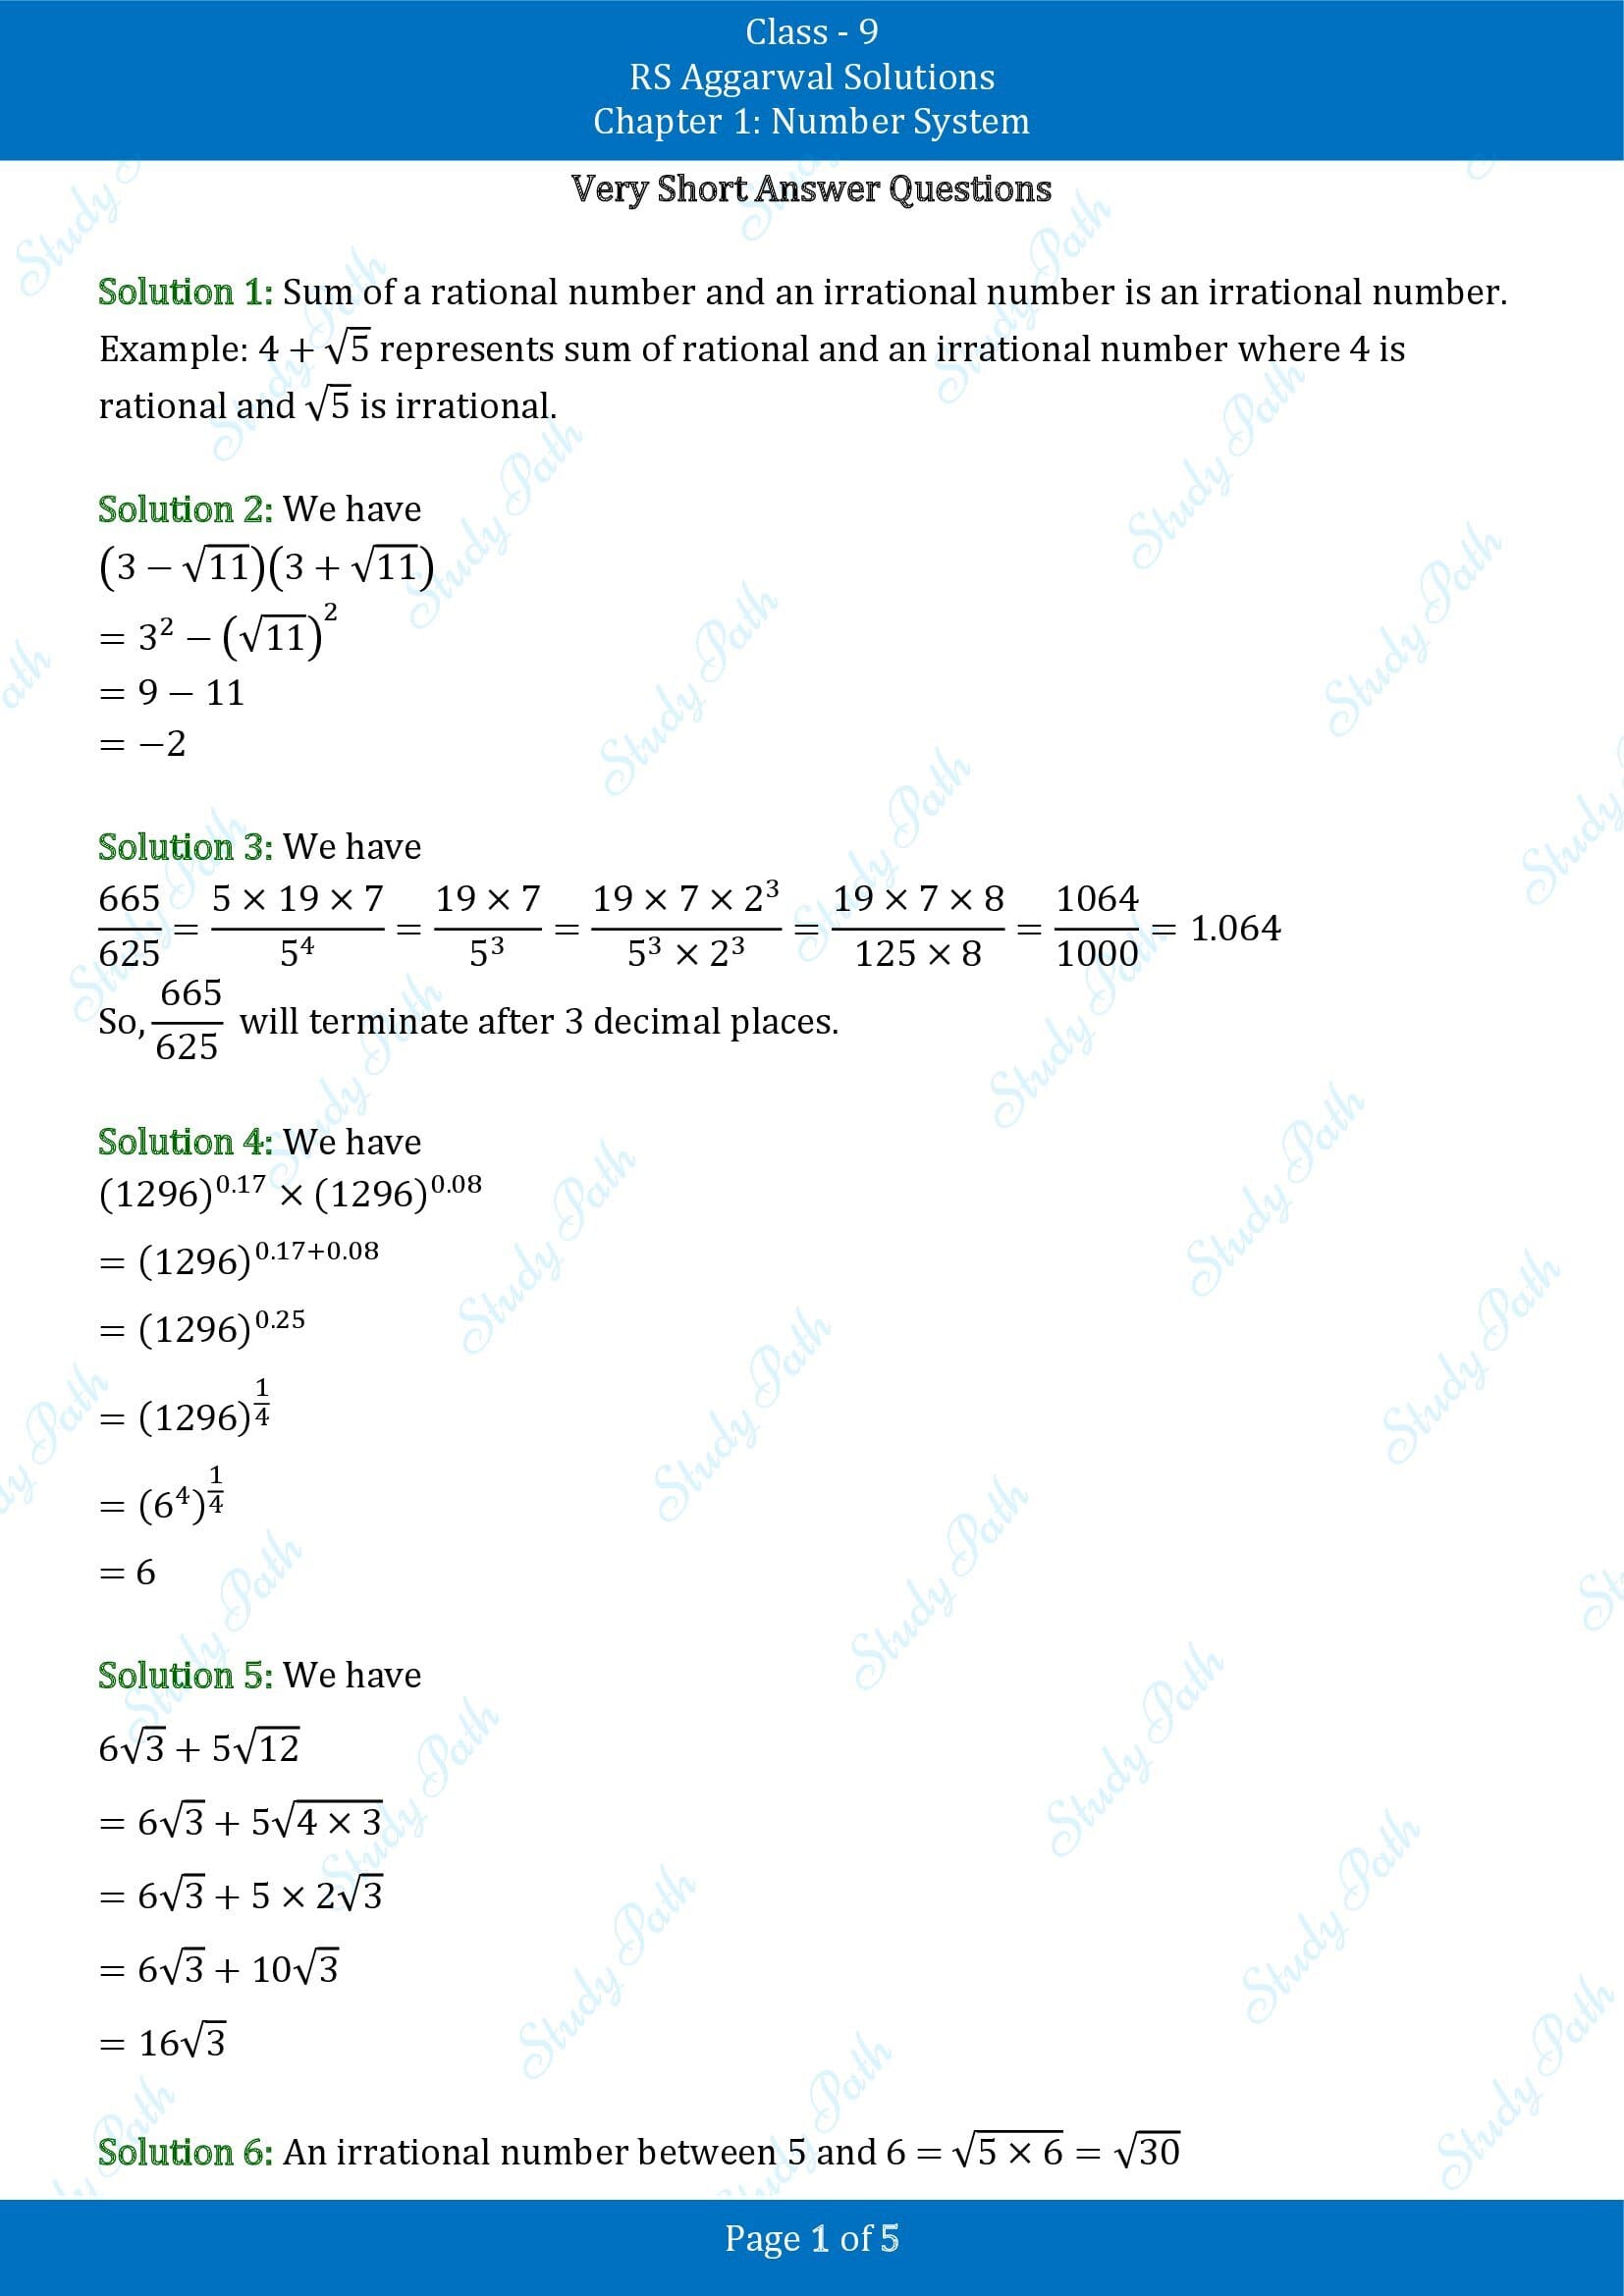 RS Aggarwal Solutions Class 9 Chapter 1 Number System Very Short Answer Questions 00001